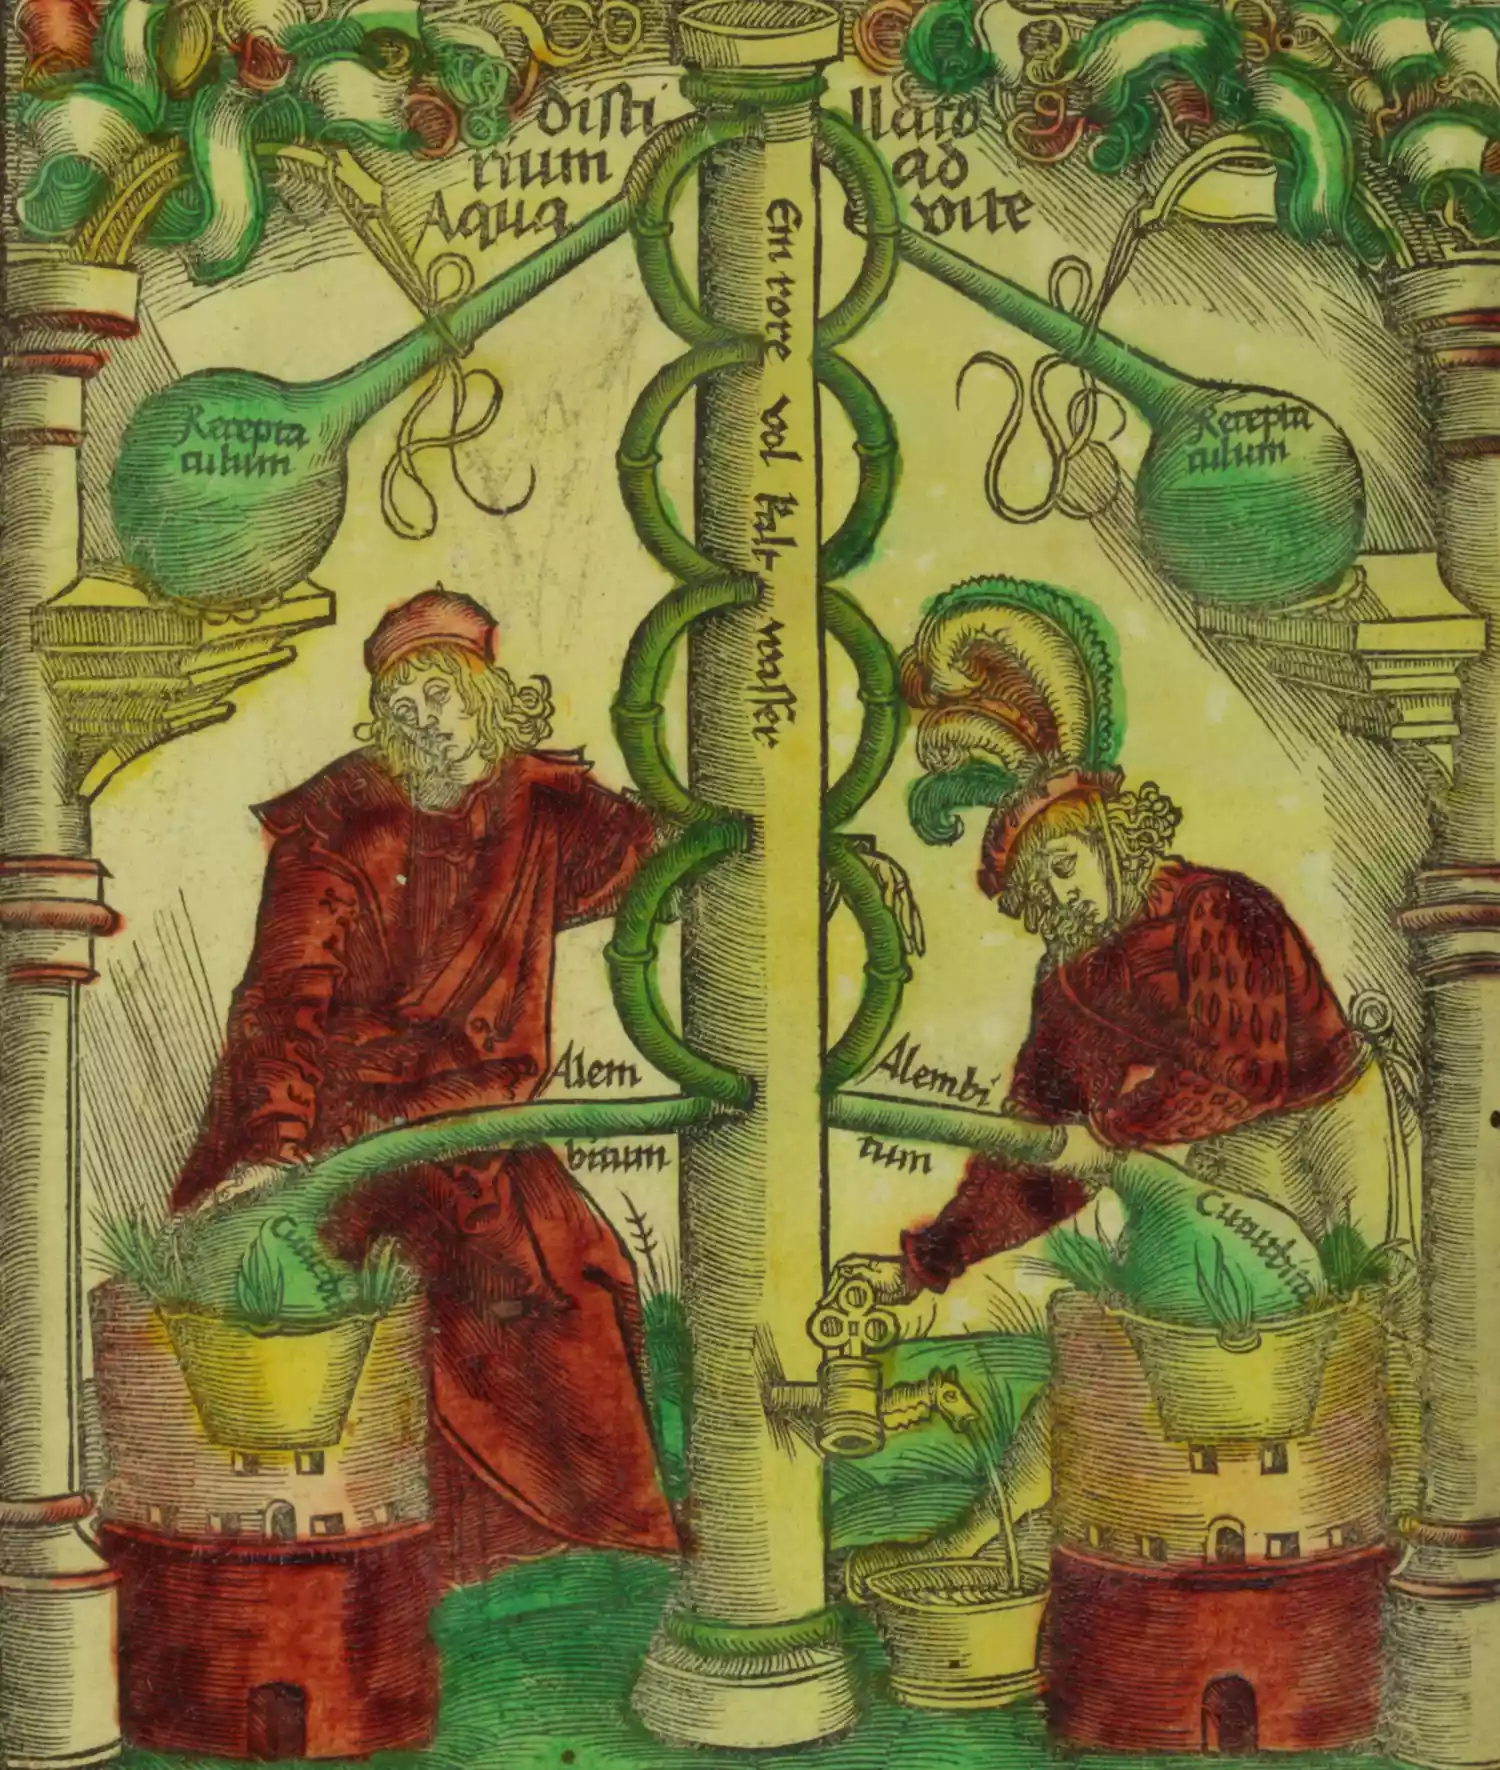 a dipiction of a medieval alchemical image